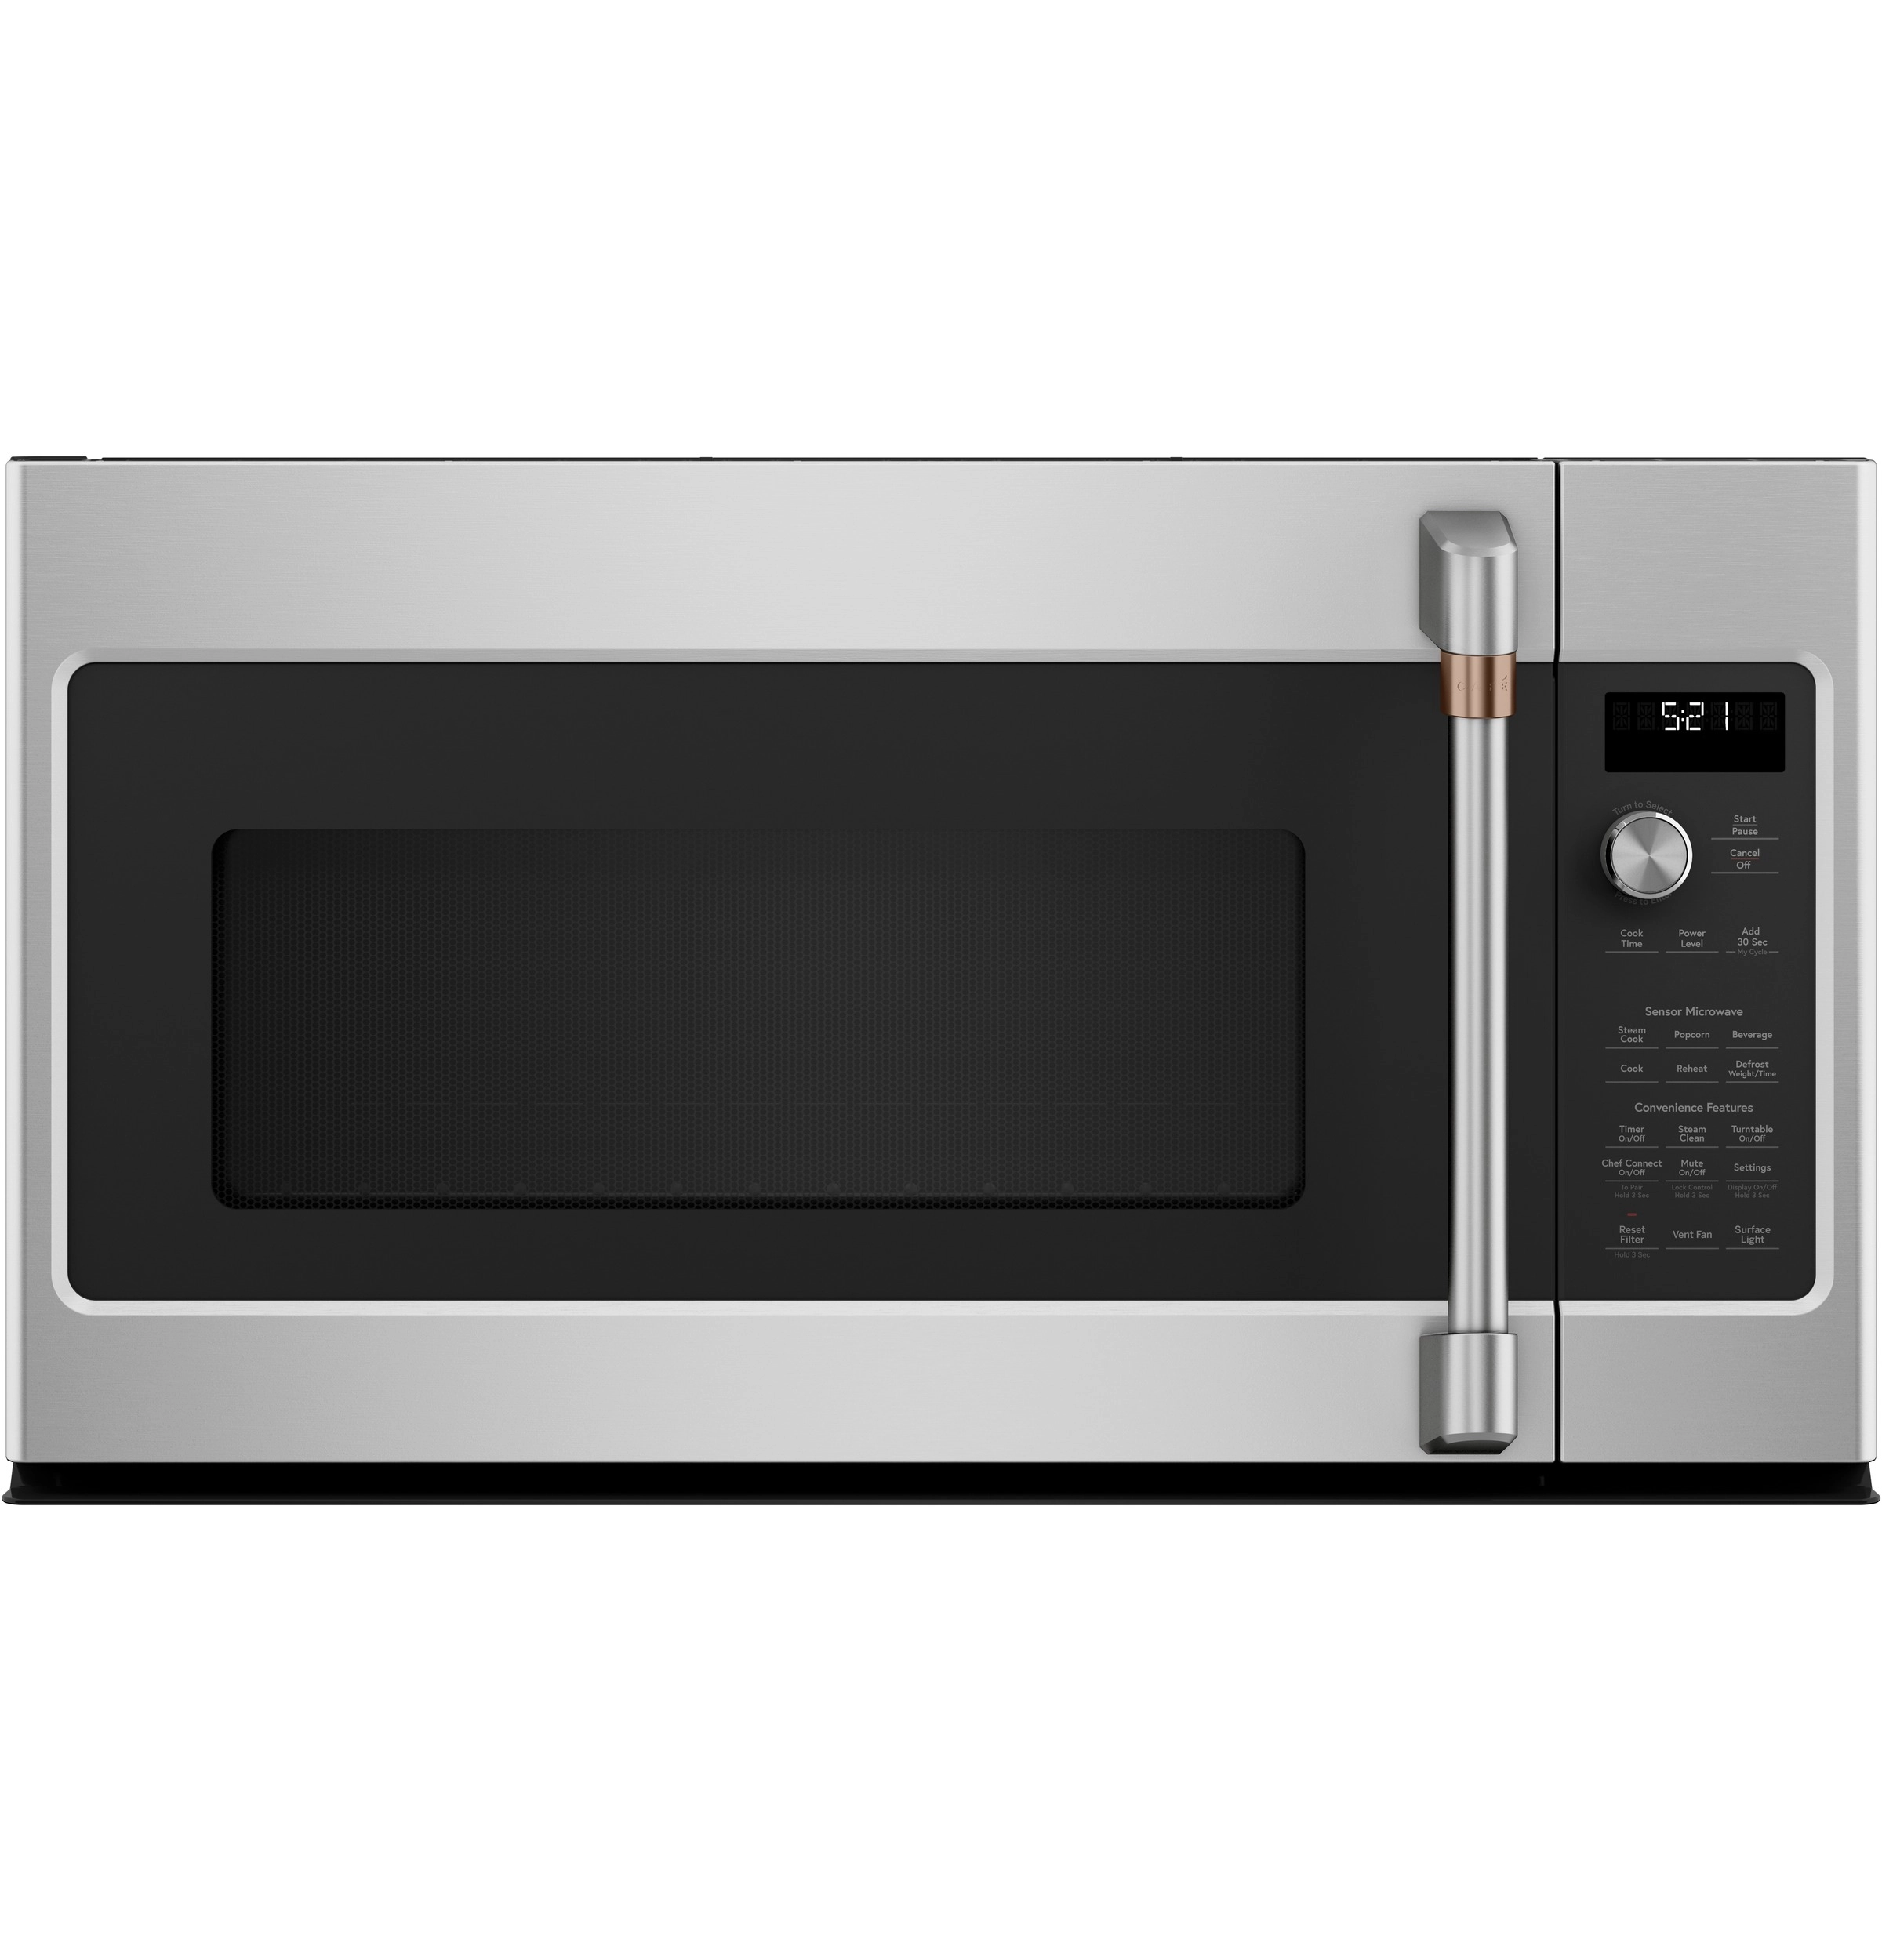 CAFE 30 Inch Over-the-Range Microwave Oven with Sensor Cooking